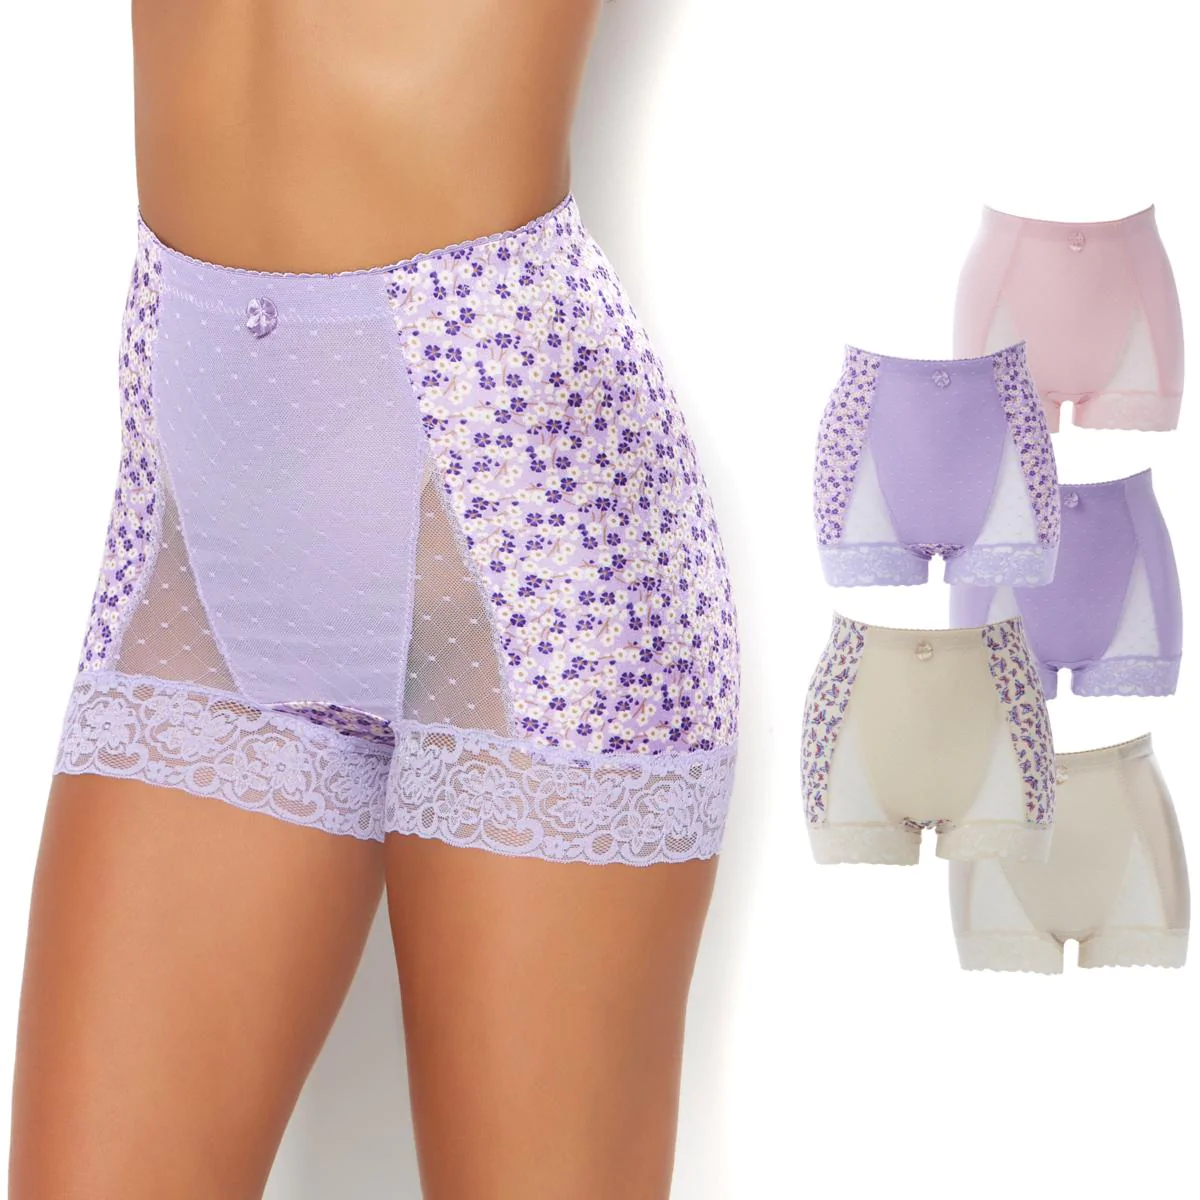 Rhonda Shear 5-pack Classic Pin-Up Panty with Lace Detail - 21874641